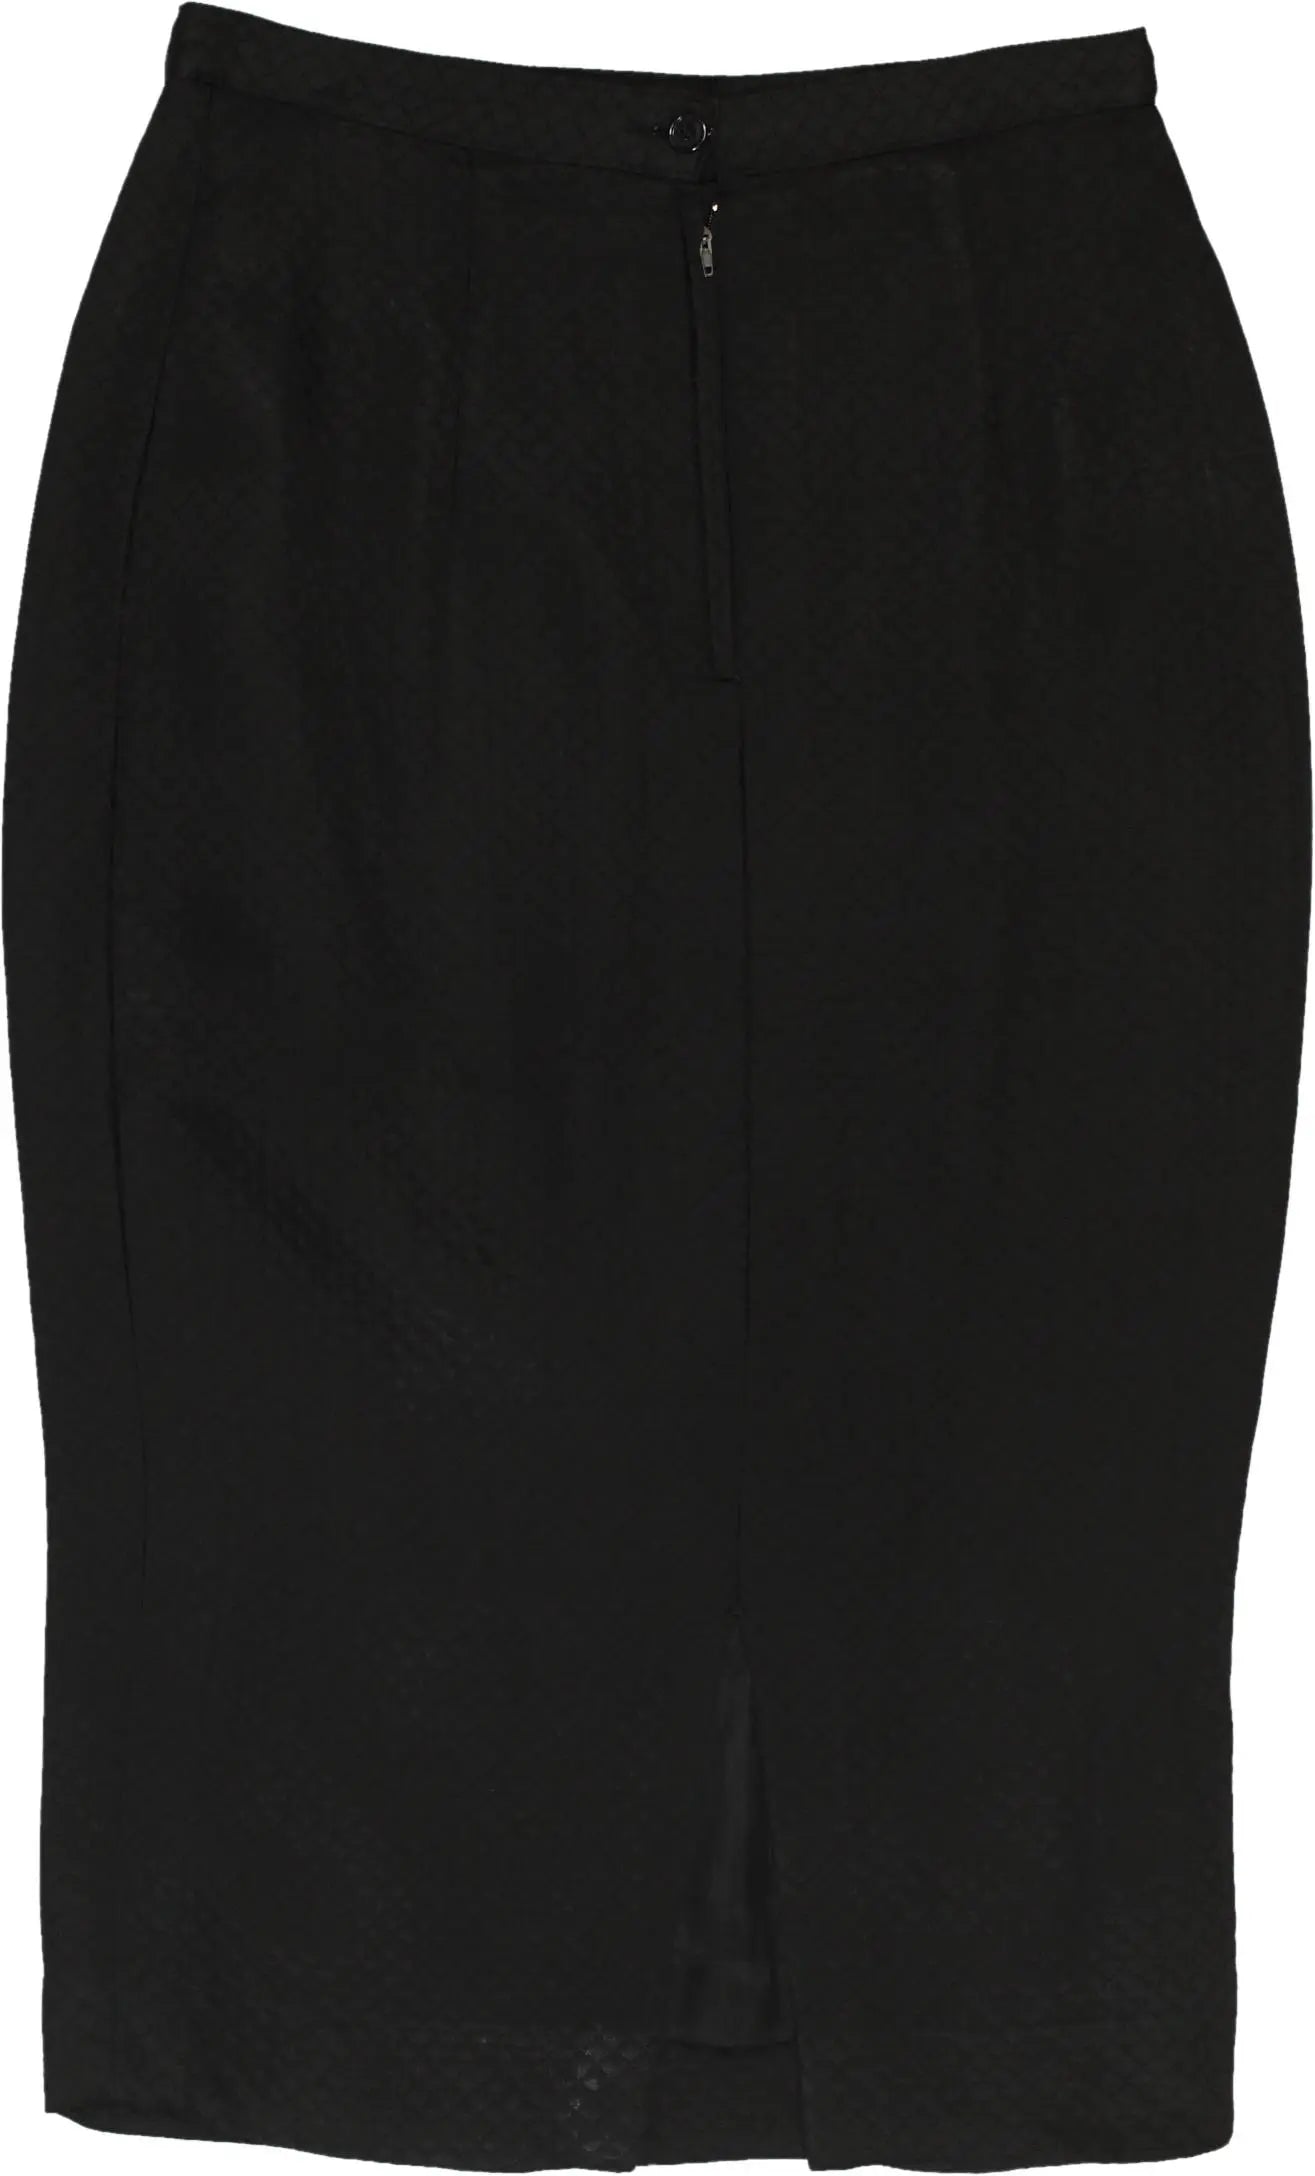 Unknown - Black pencil skirt- ThriftTale.com - Vintage and second handclothing